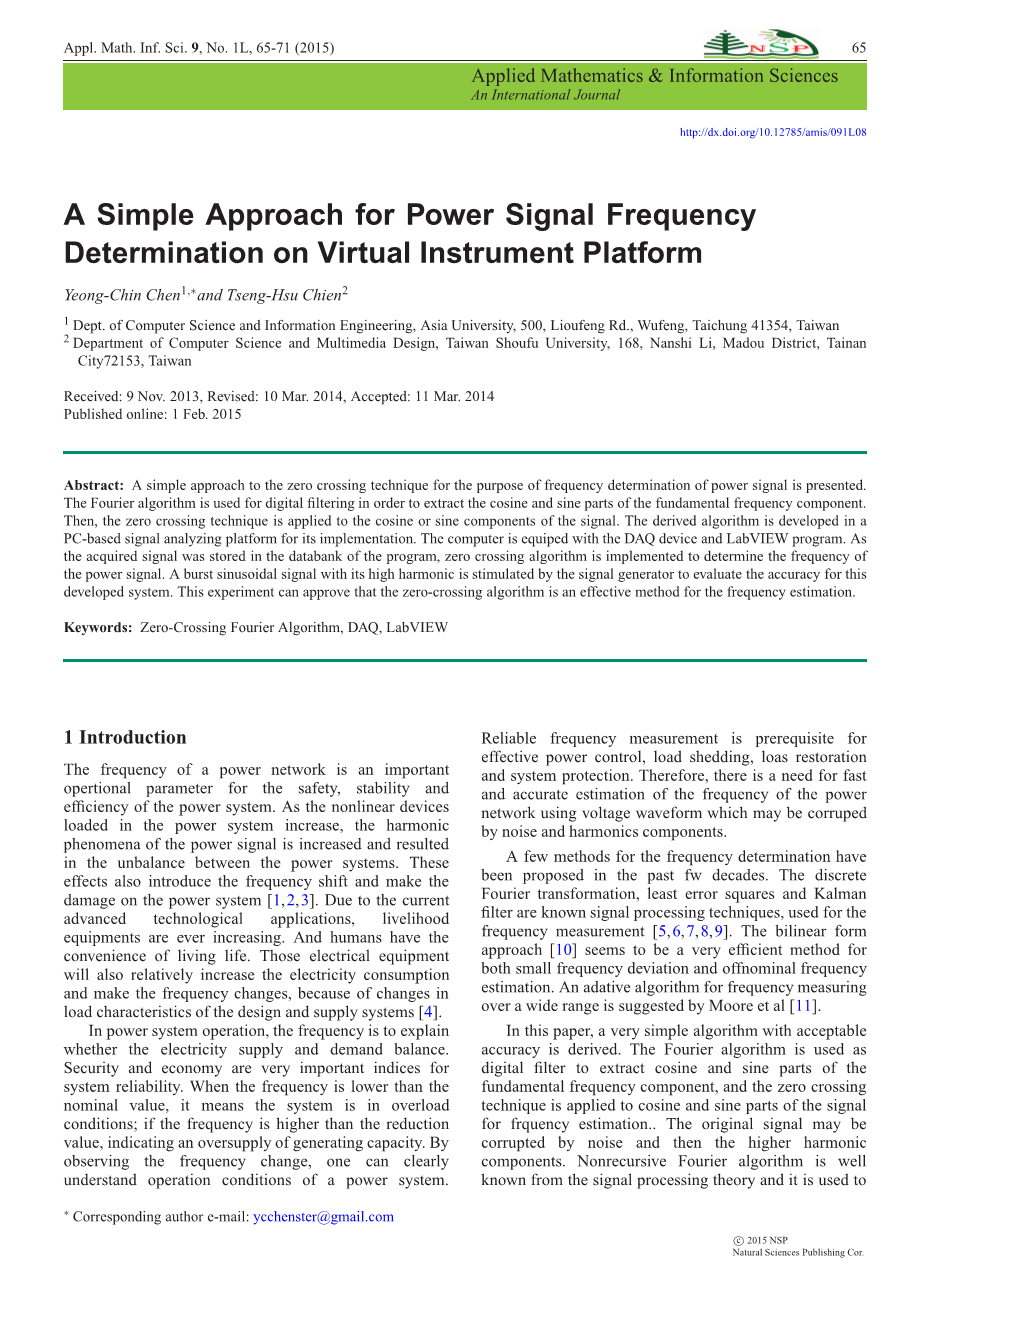 A Simple Approach for Power Signal Frequency Determination on Virtual Instrument Platform